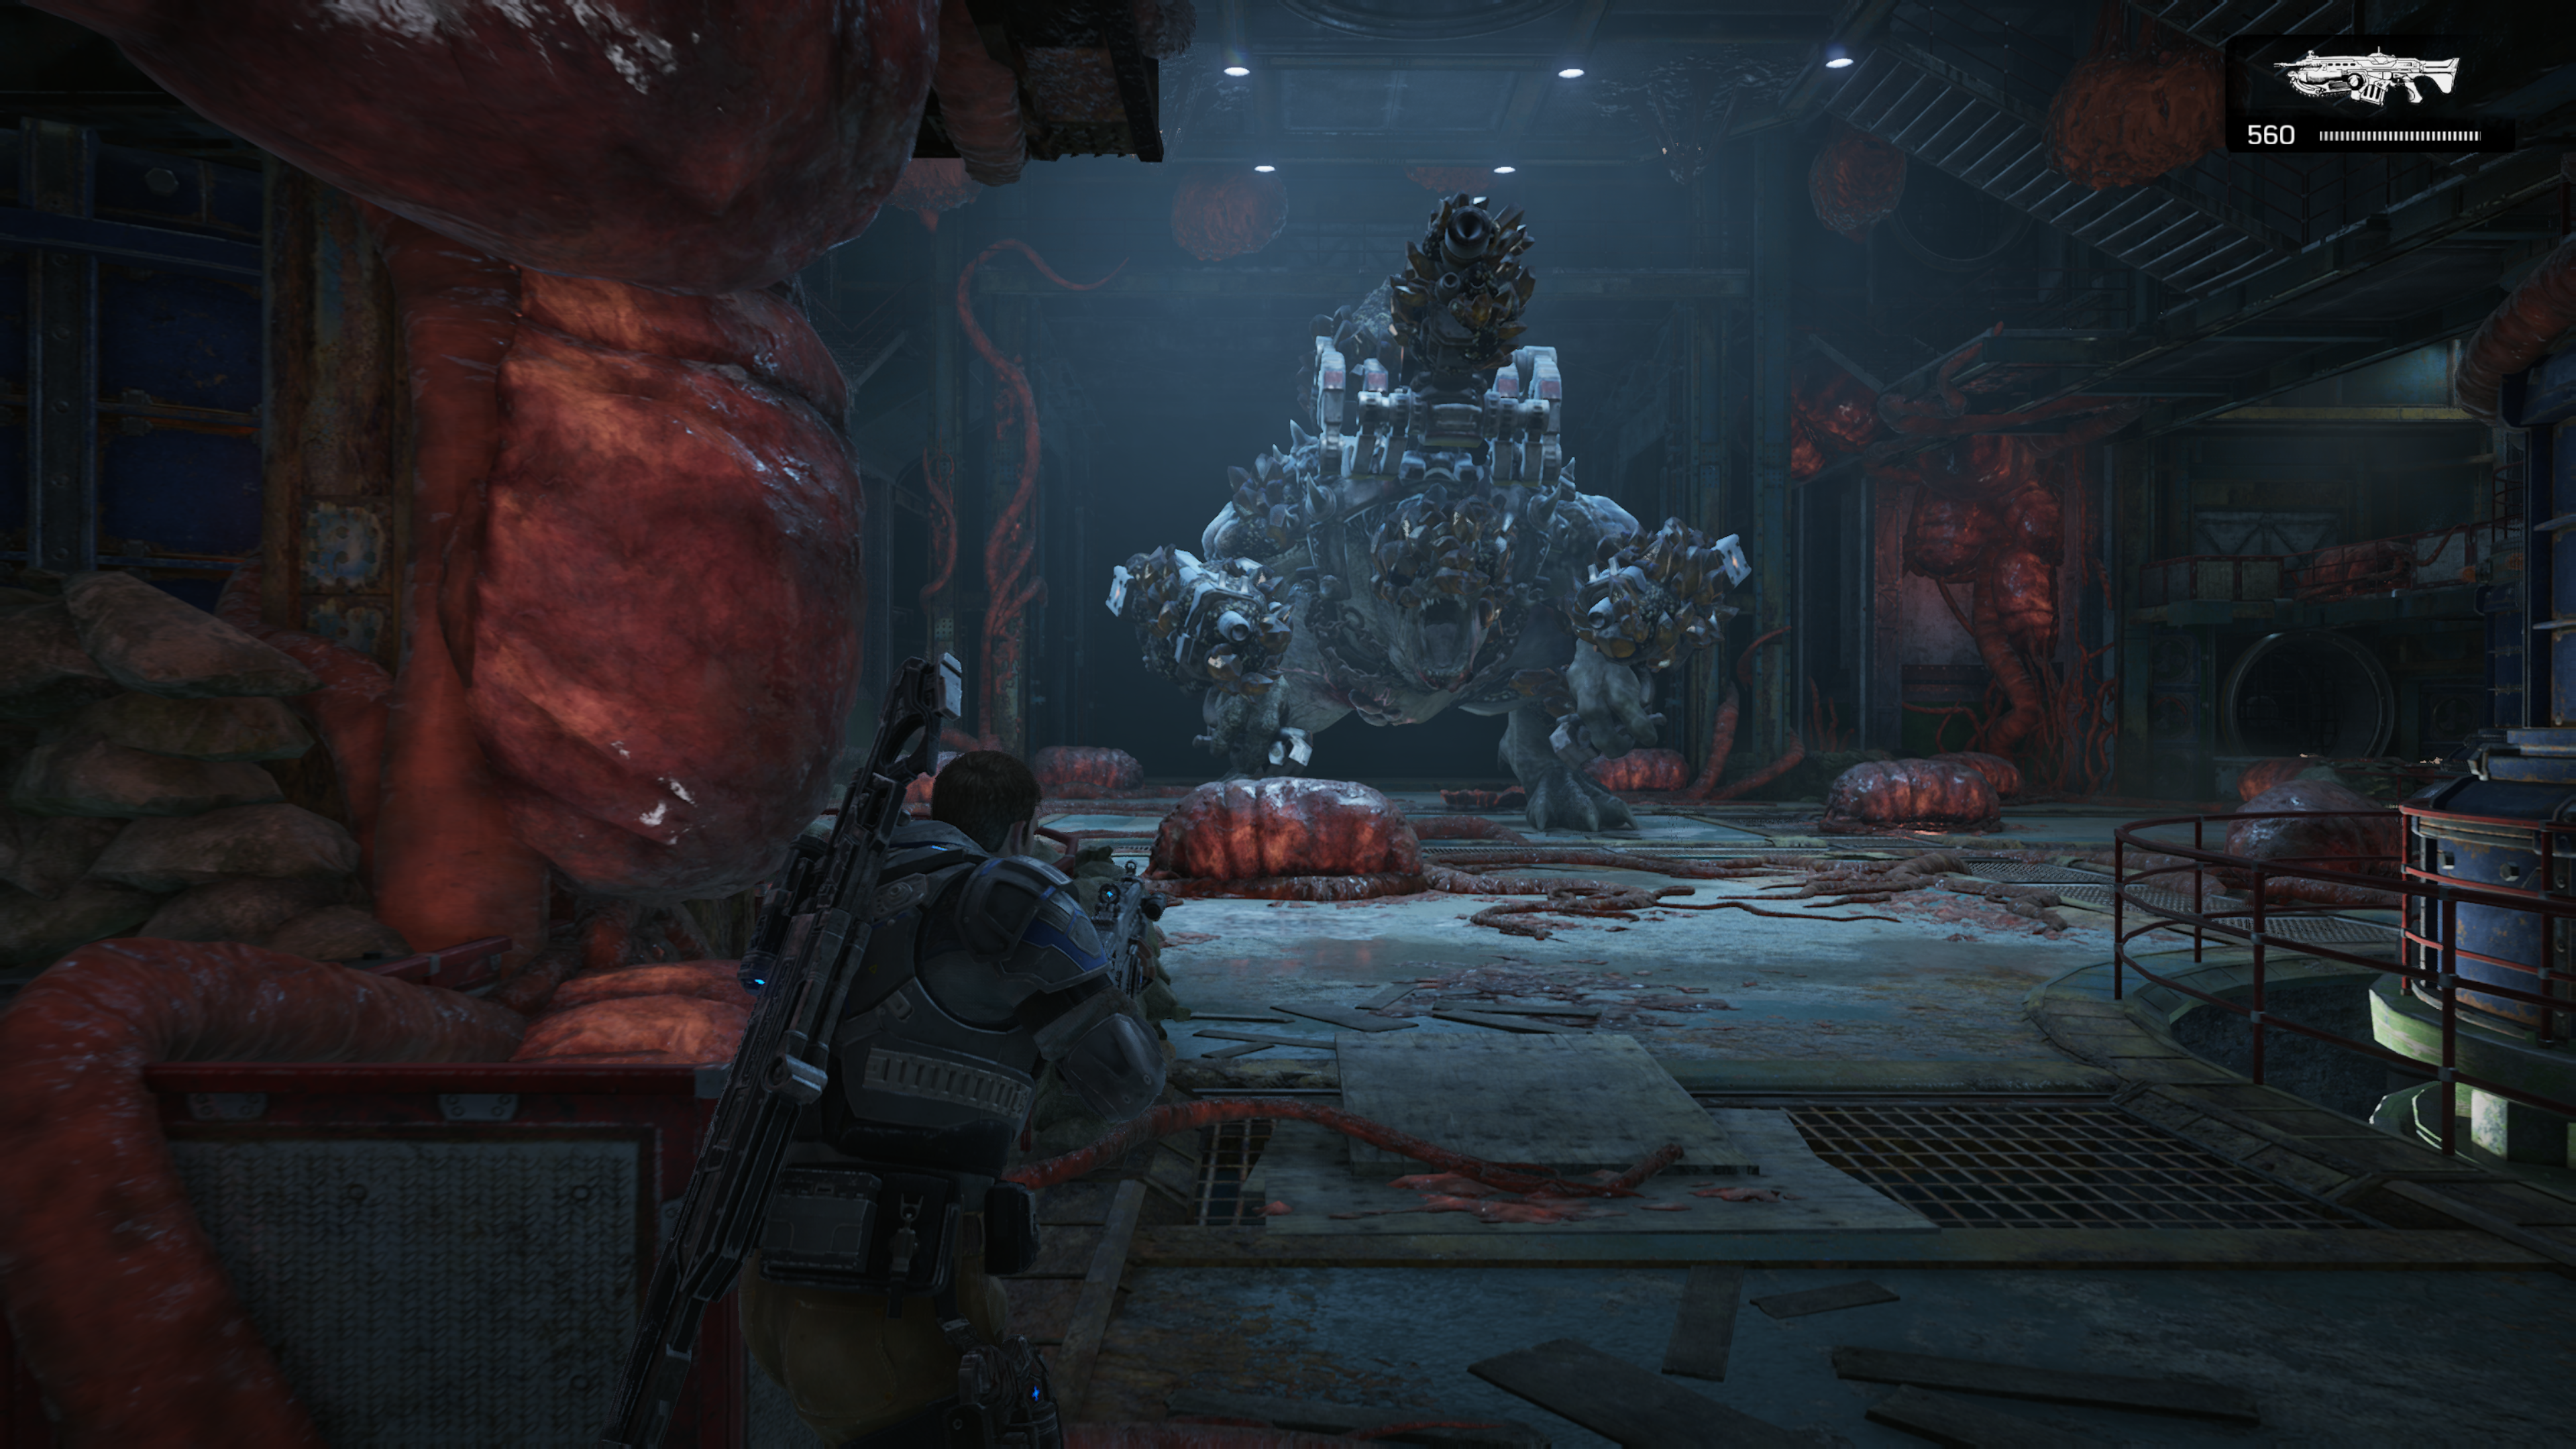 Gears of War 4 Review And Benchmark Performance Quick Take